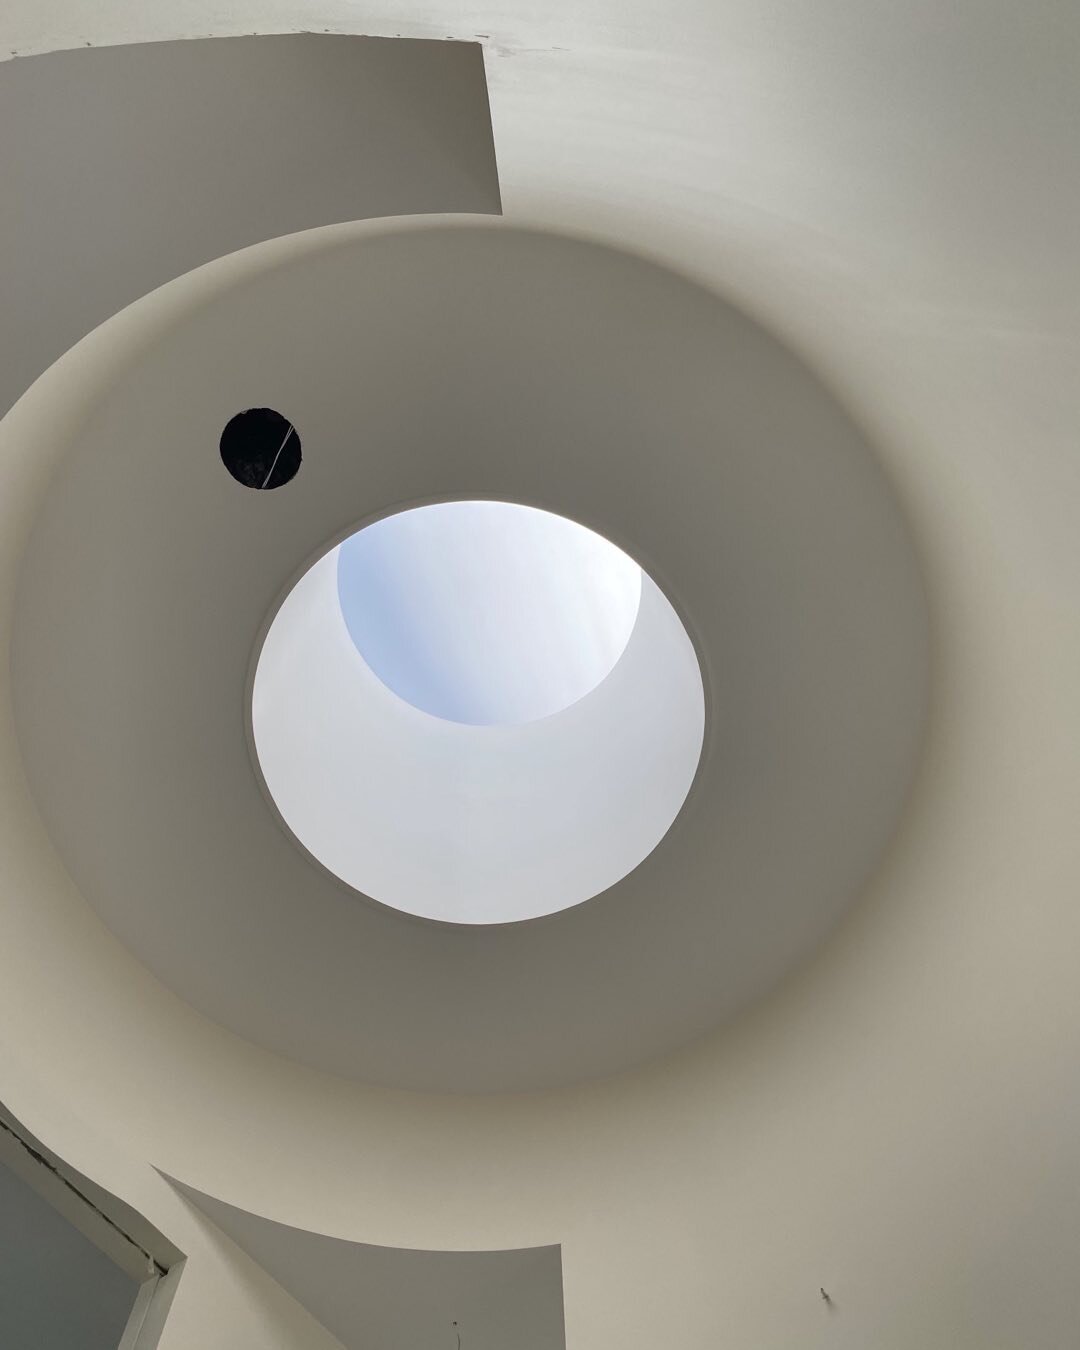 The dome light is installed 2m in diameter double skinned impact resistant the effect is stunning. The shading in a half moon shape in the winter sun is captivating as it rotates with the time of day. #architects #australianarchitecture #art #artinar